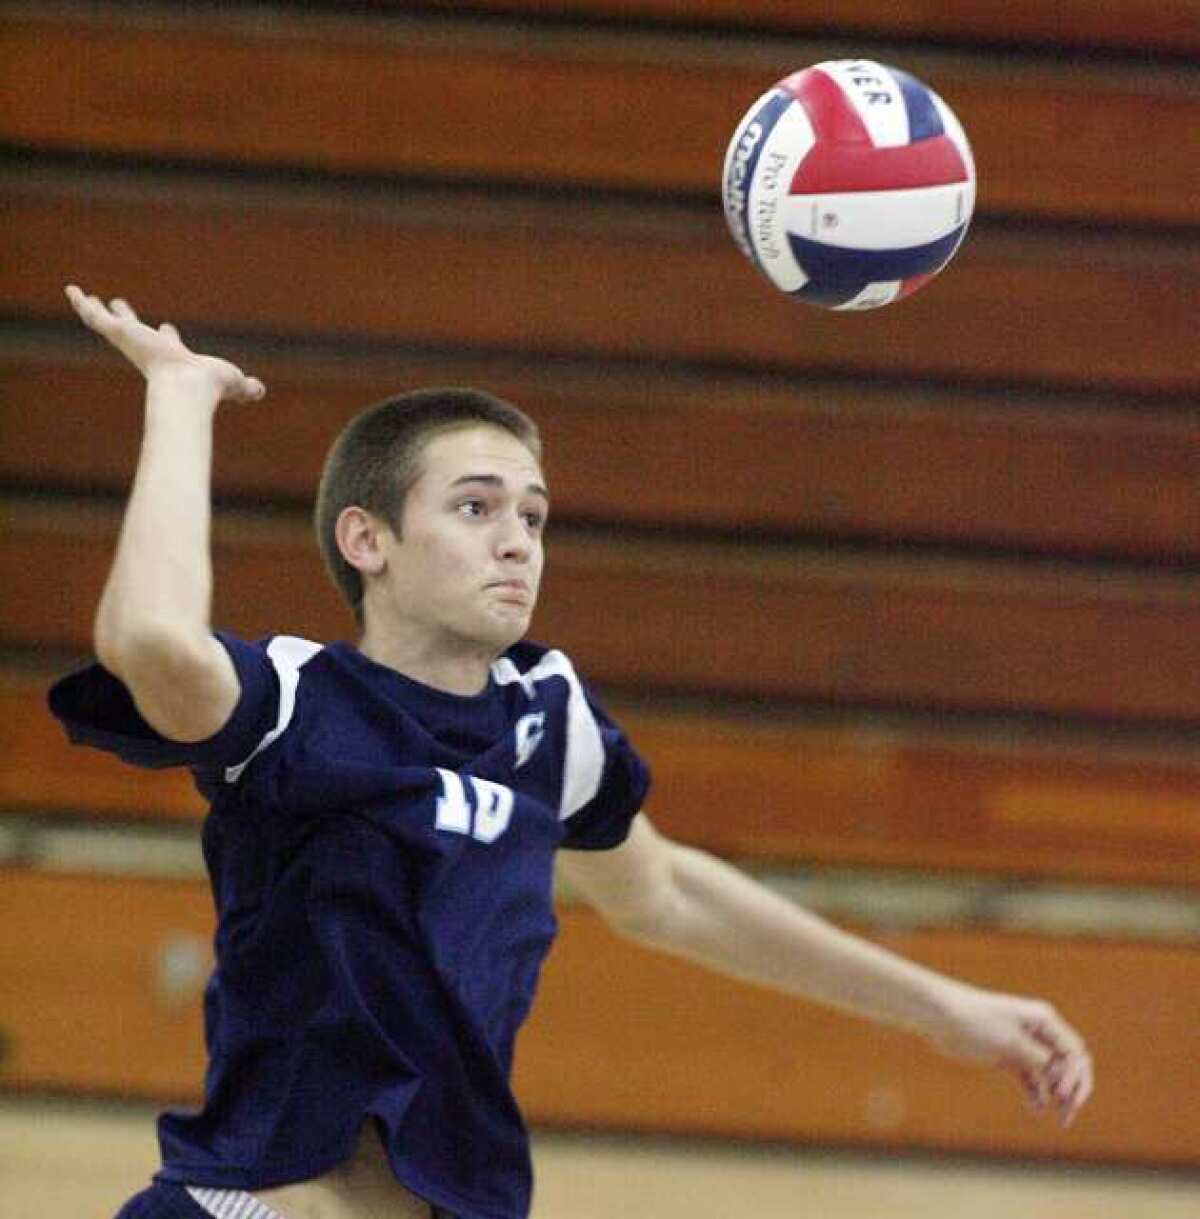 ARCHIVE PHOTO: Crescenta Valley's Freedom Tripp jumps for a kill attempt against Hoover in a Pacific League boys volleyball match.